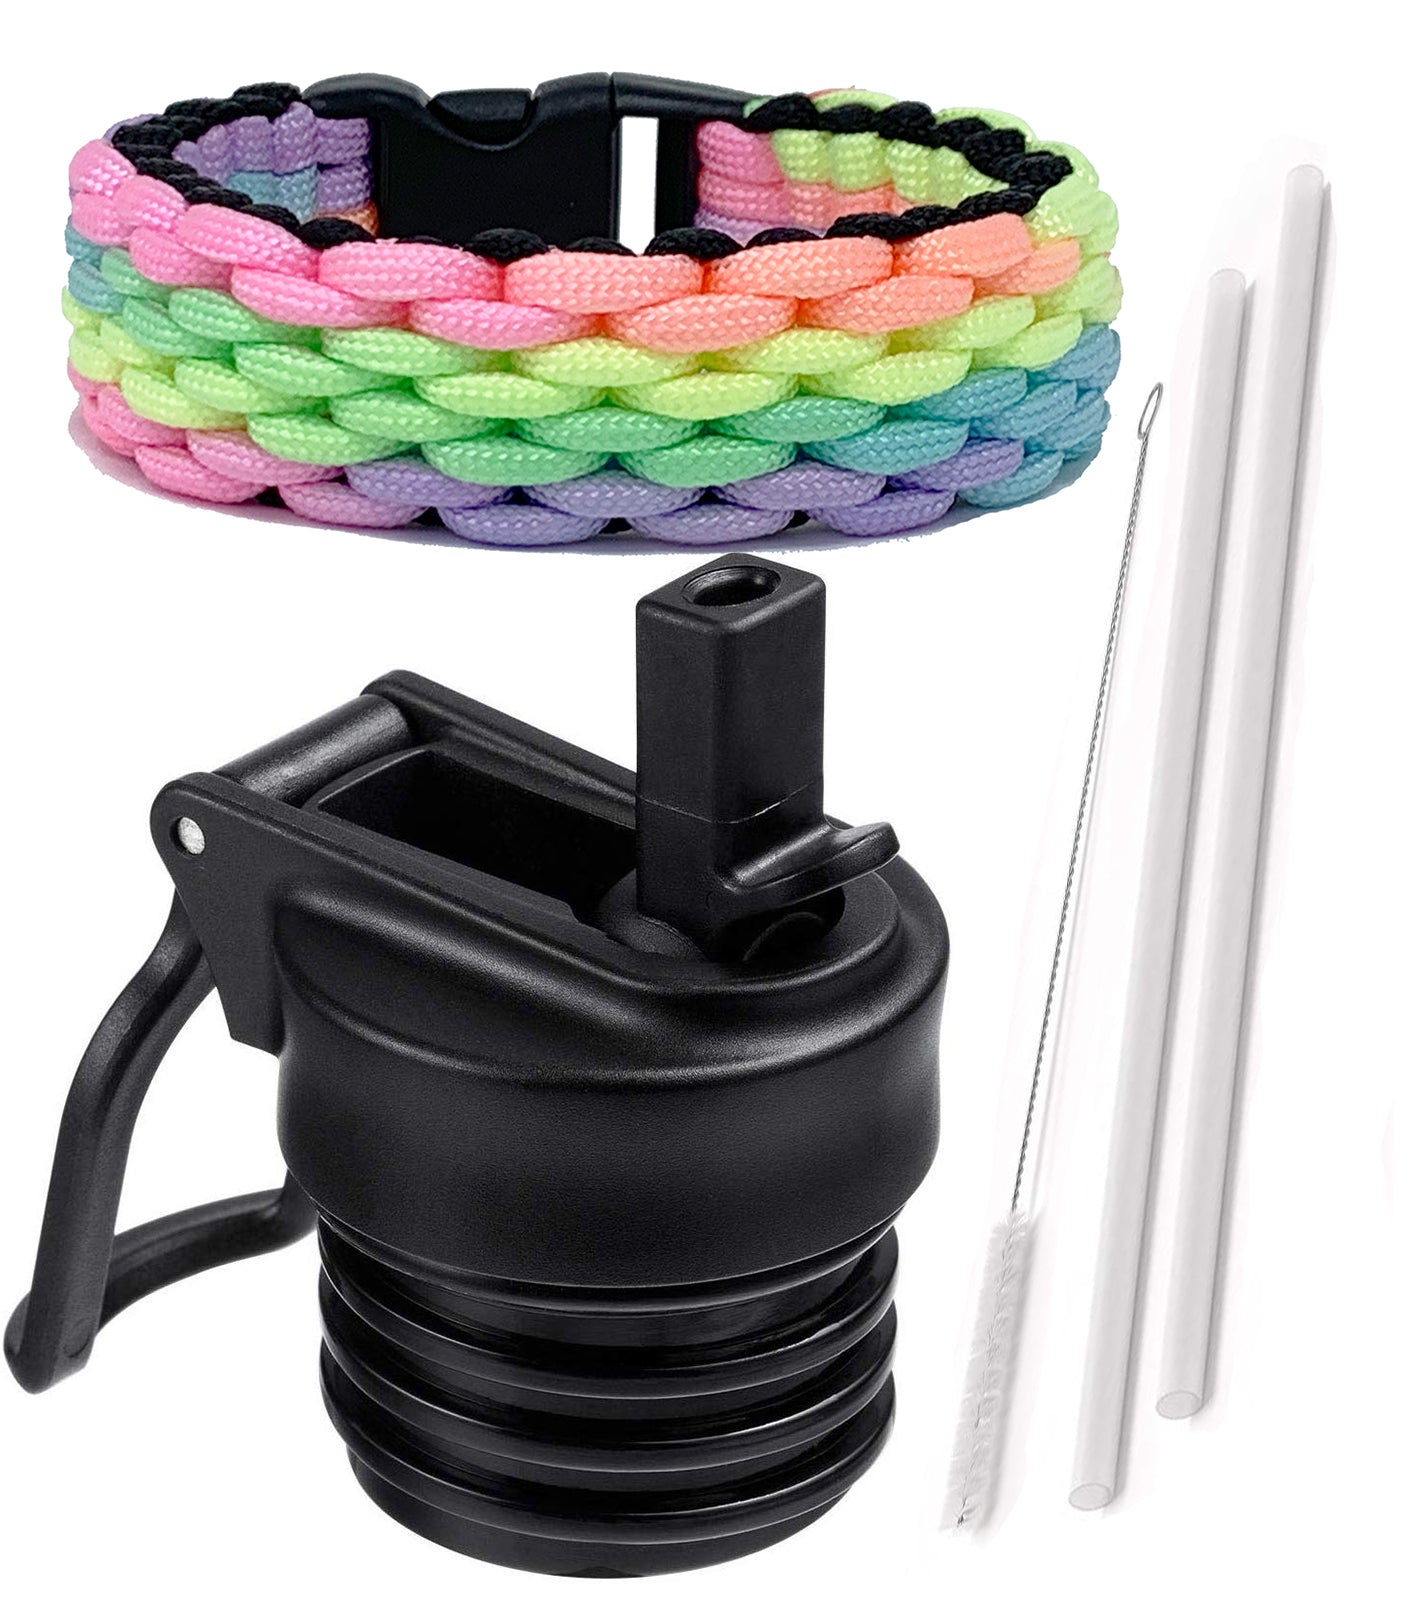  Straw Lid for Hydroflask 24 oz, 21 oz, 18 oz — Paracord Handle,  Shoulder Strap, Straws, Straw Cleaner — Standard Mouth Water Bottle  Accessories Kit for Hydro Flask, IronFlask and More (